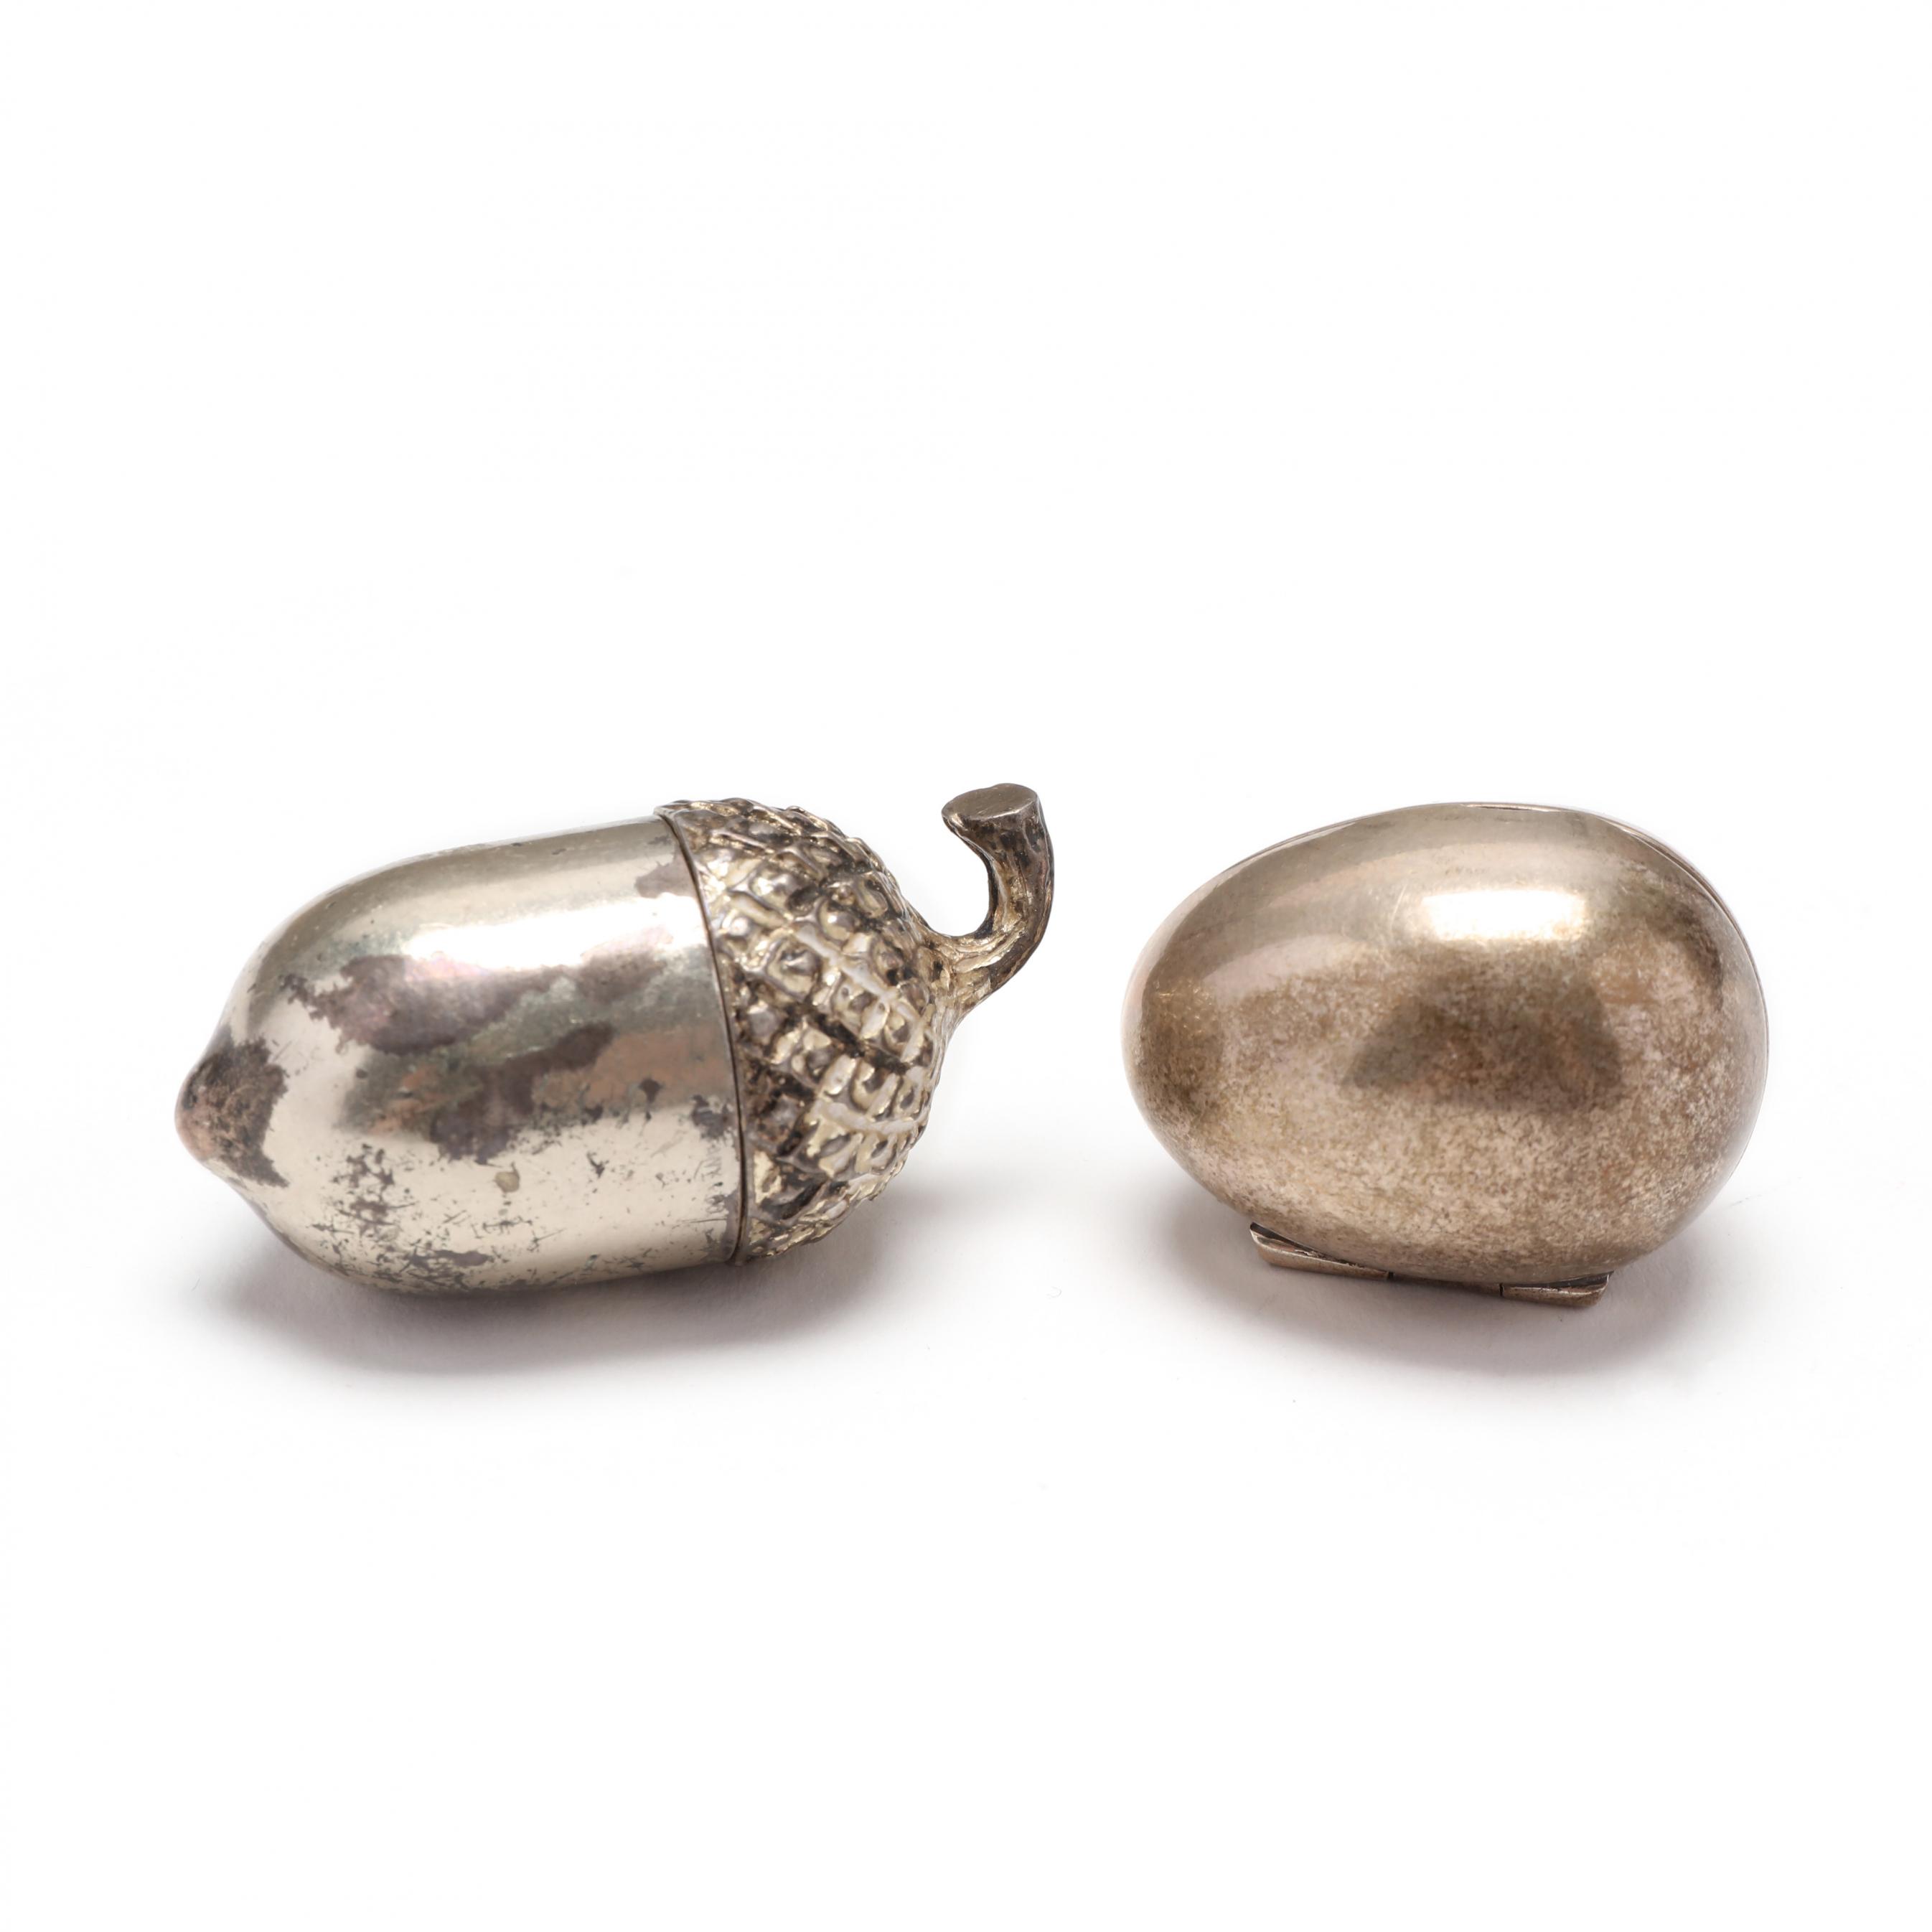 TIFFANY & COMPANY Sterling Egg Pill Box sold at auction on 13th June